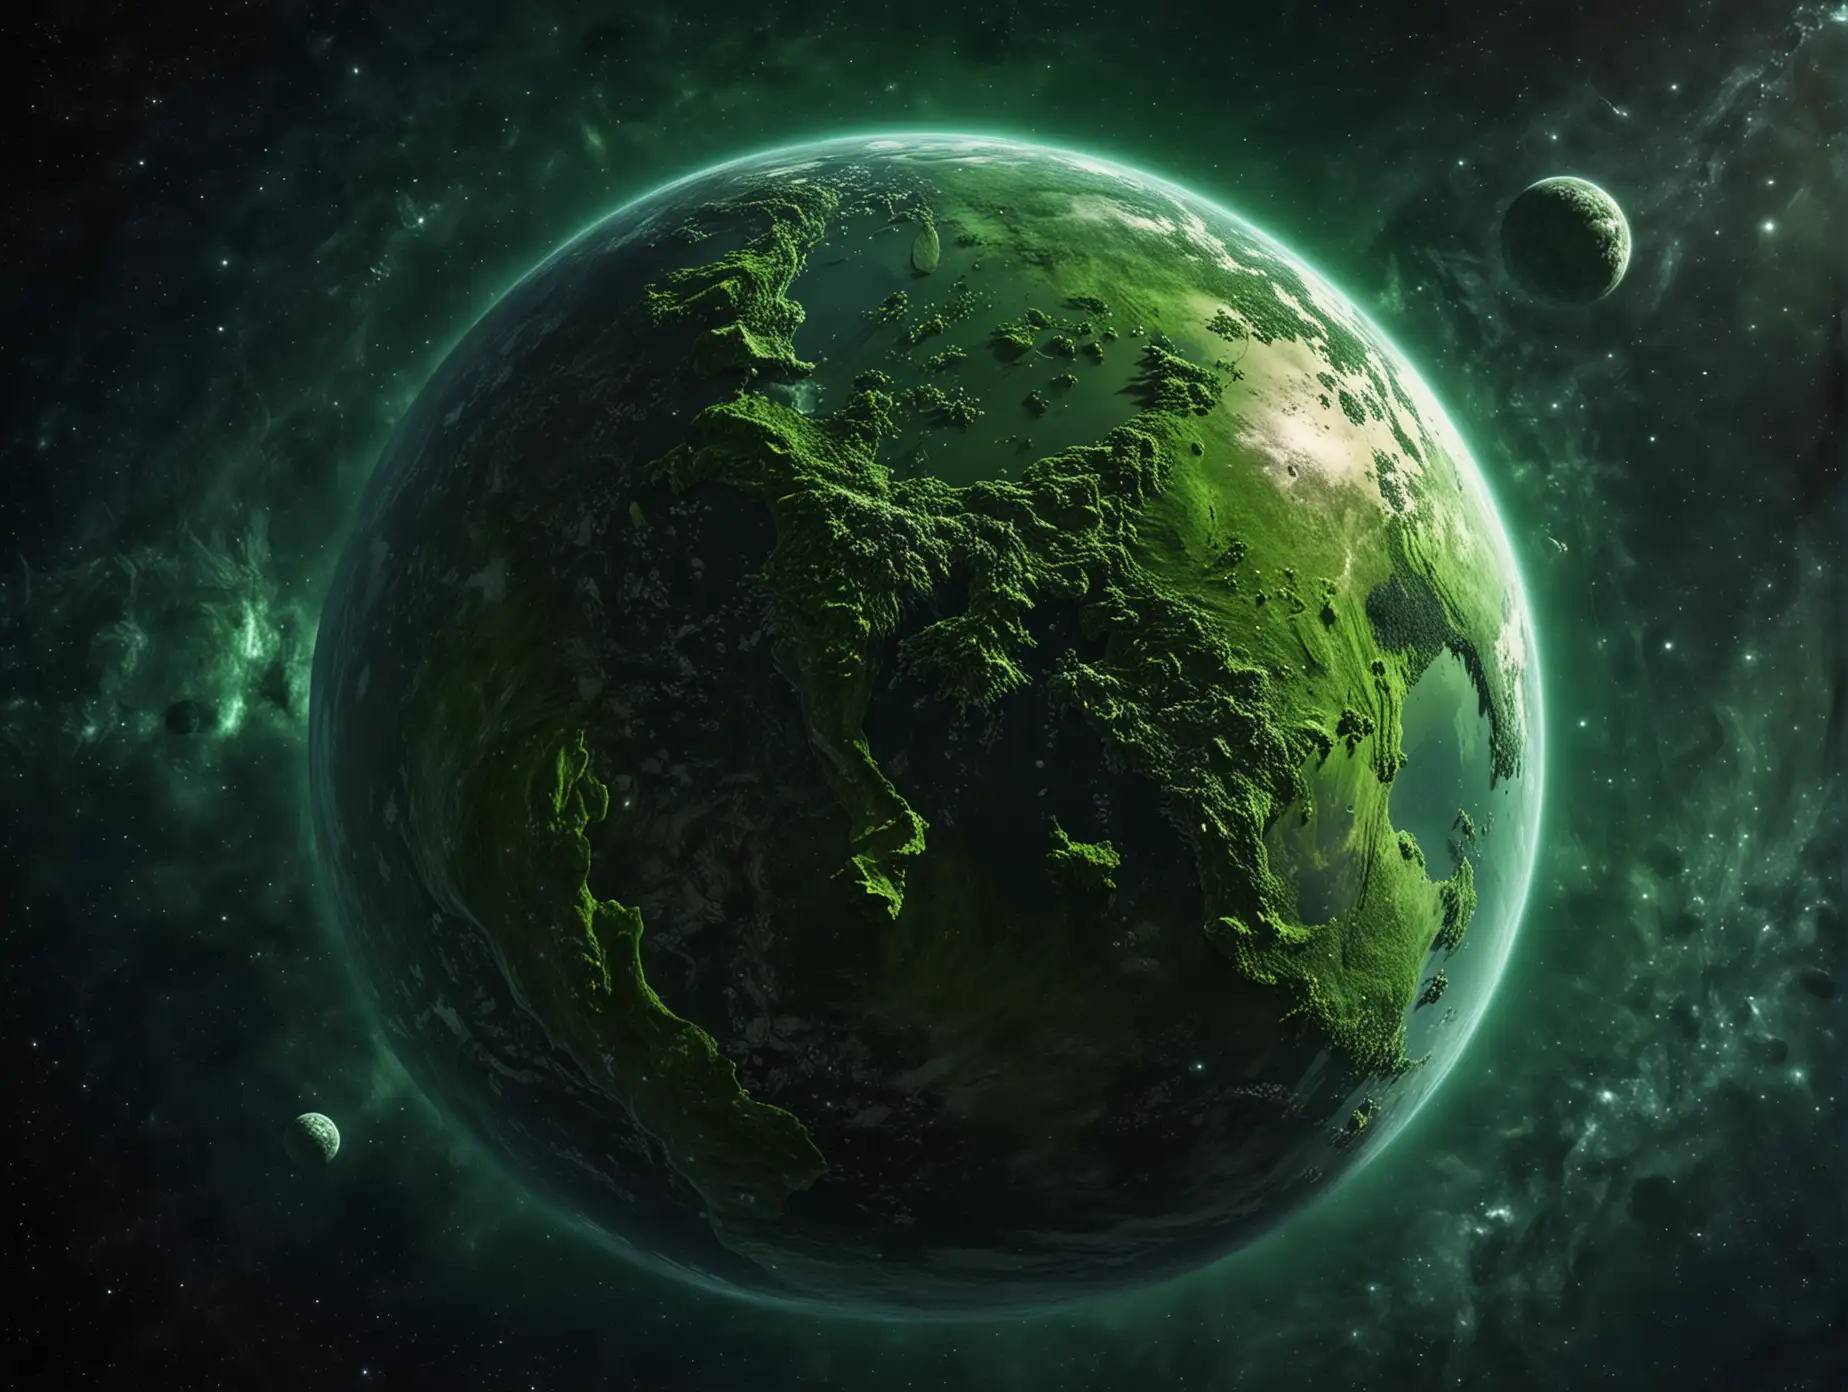 A very green full body planet. THE IMAGE is FROM THE SPACE.